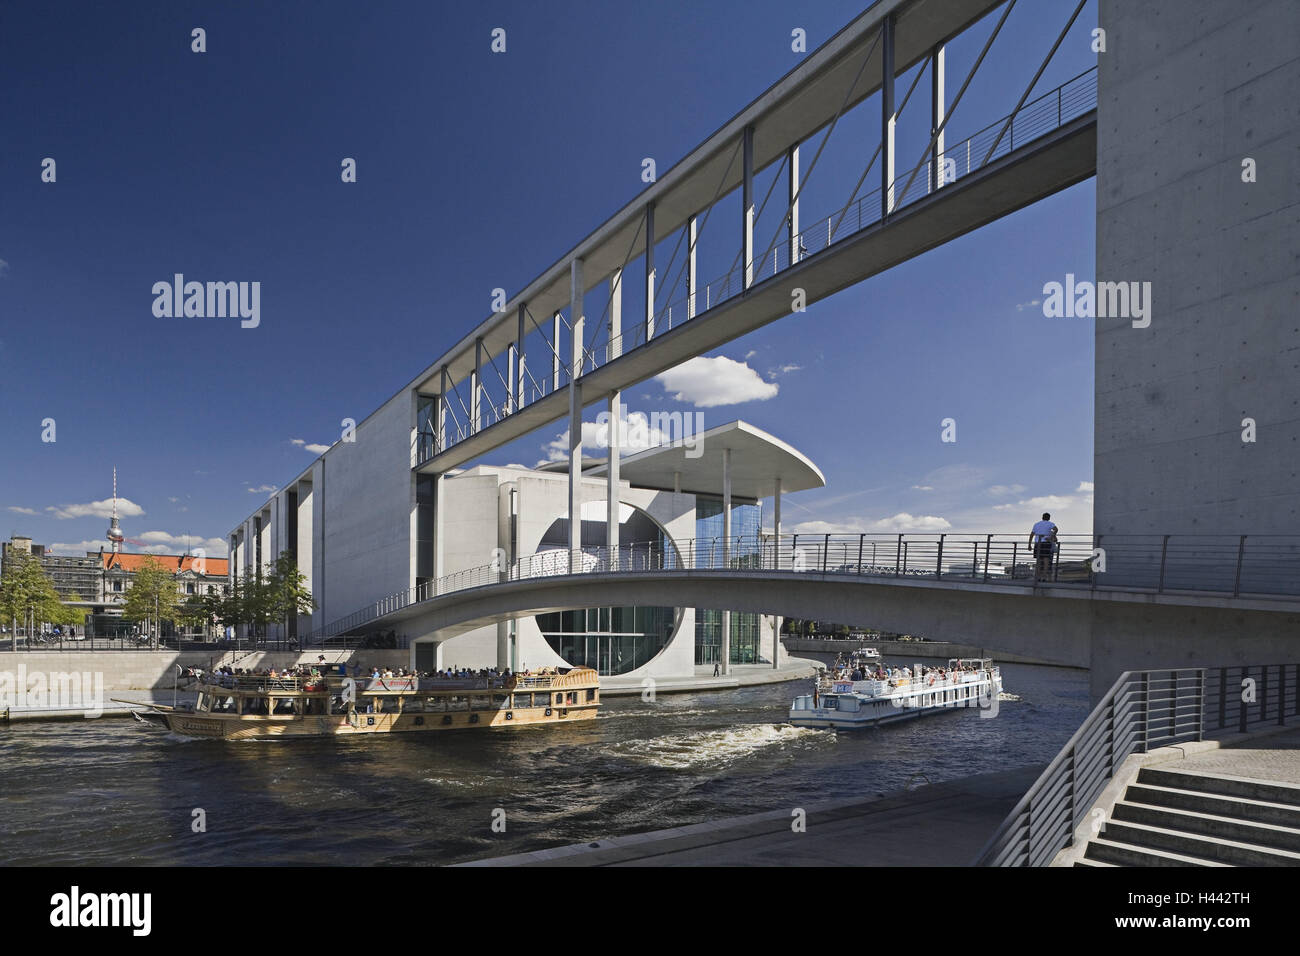 Germany, Berlin, the Bundestag, Marie-Elisabeth-Lüders-Haus, ships, tourists, river Spree, Europe, town, capital, place of interest, Spree bow, government district, bridge, architecture, building, Lüdersblock, exposed concrete, rotunda, parliament library Stock Photo